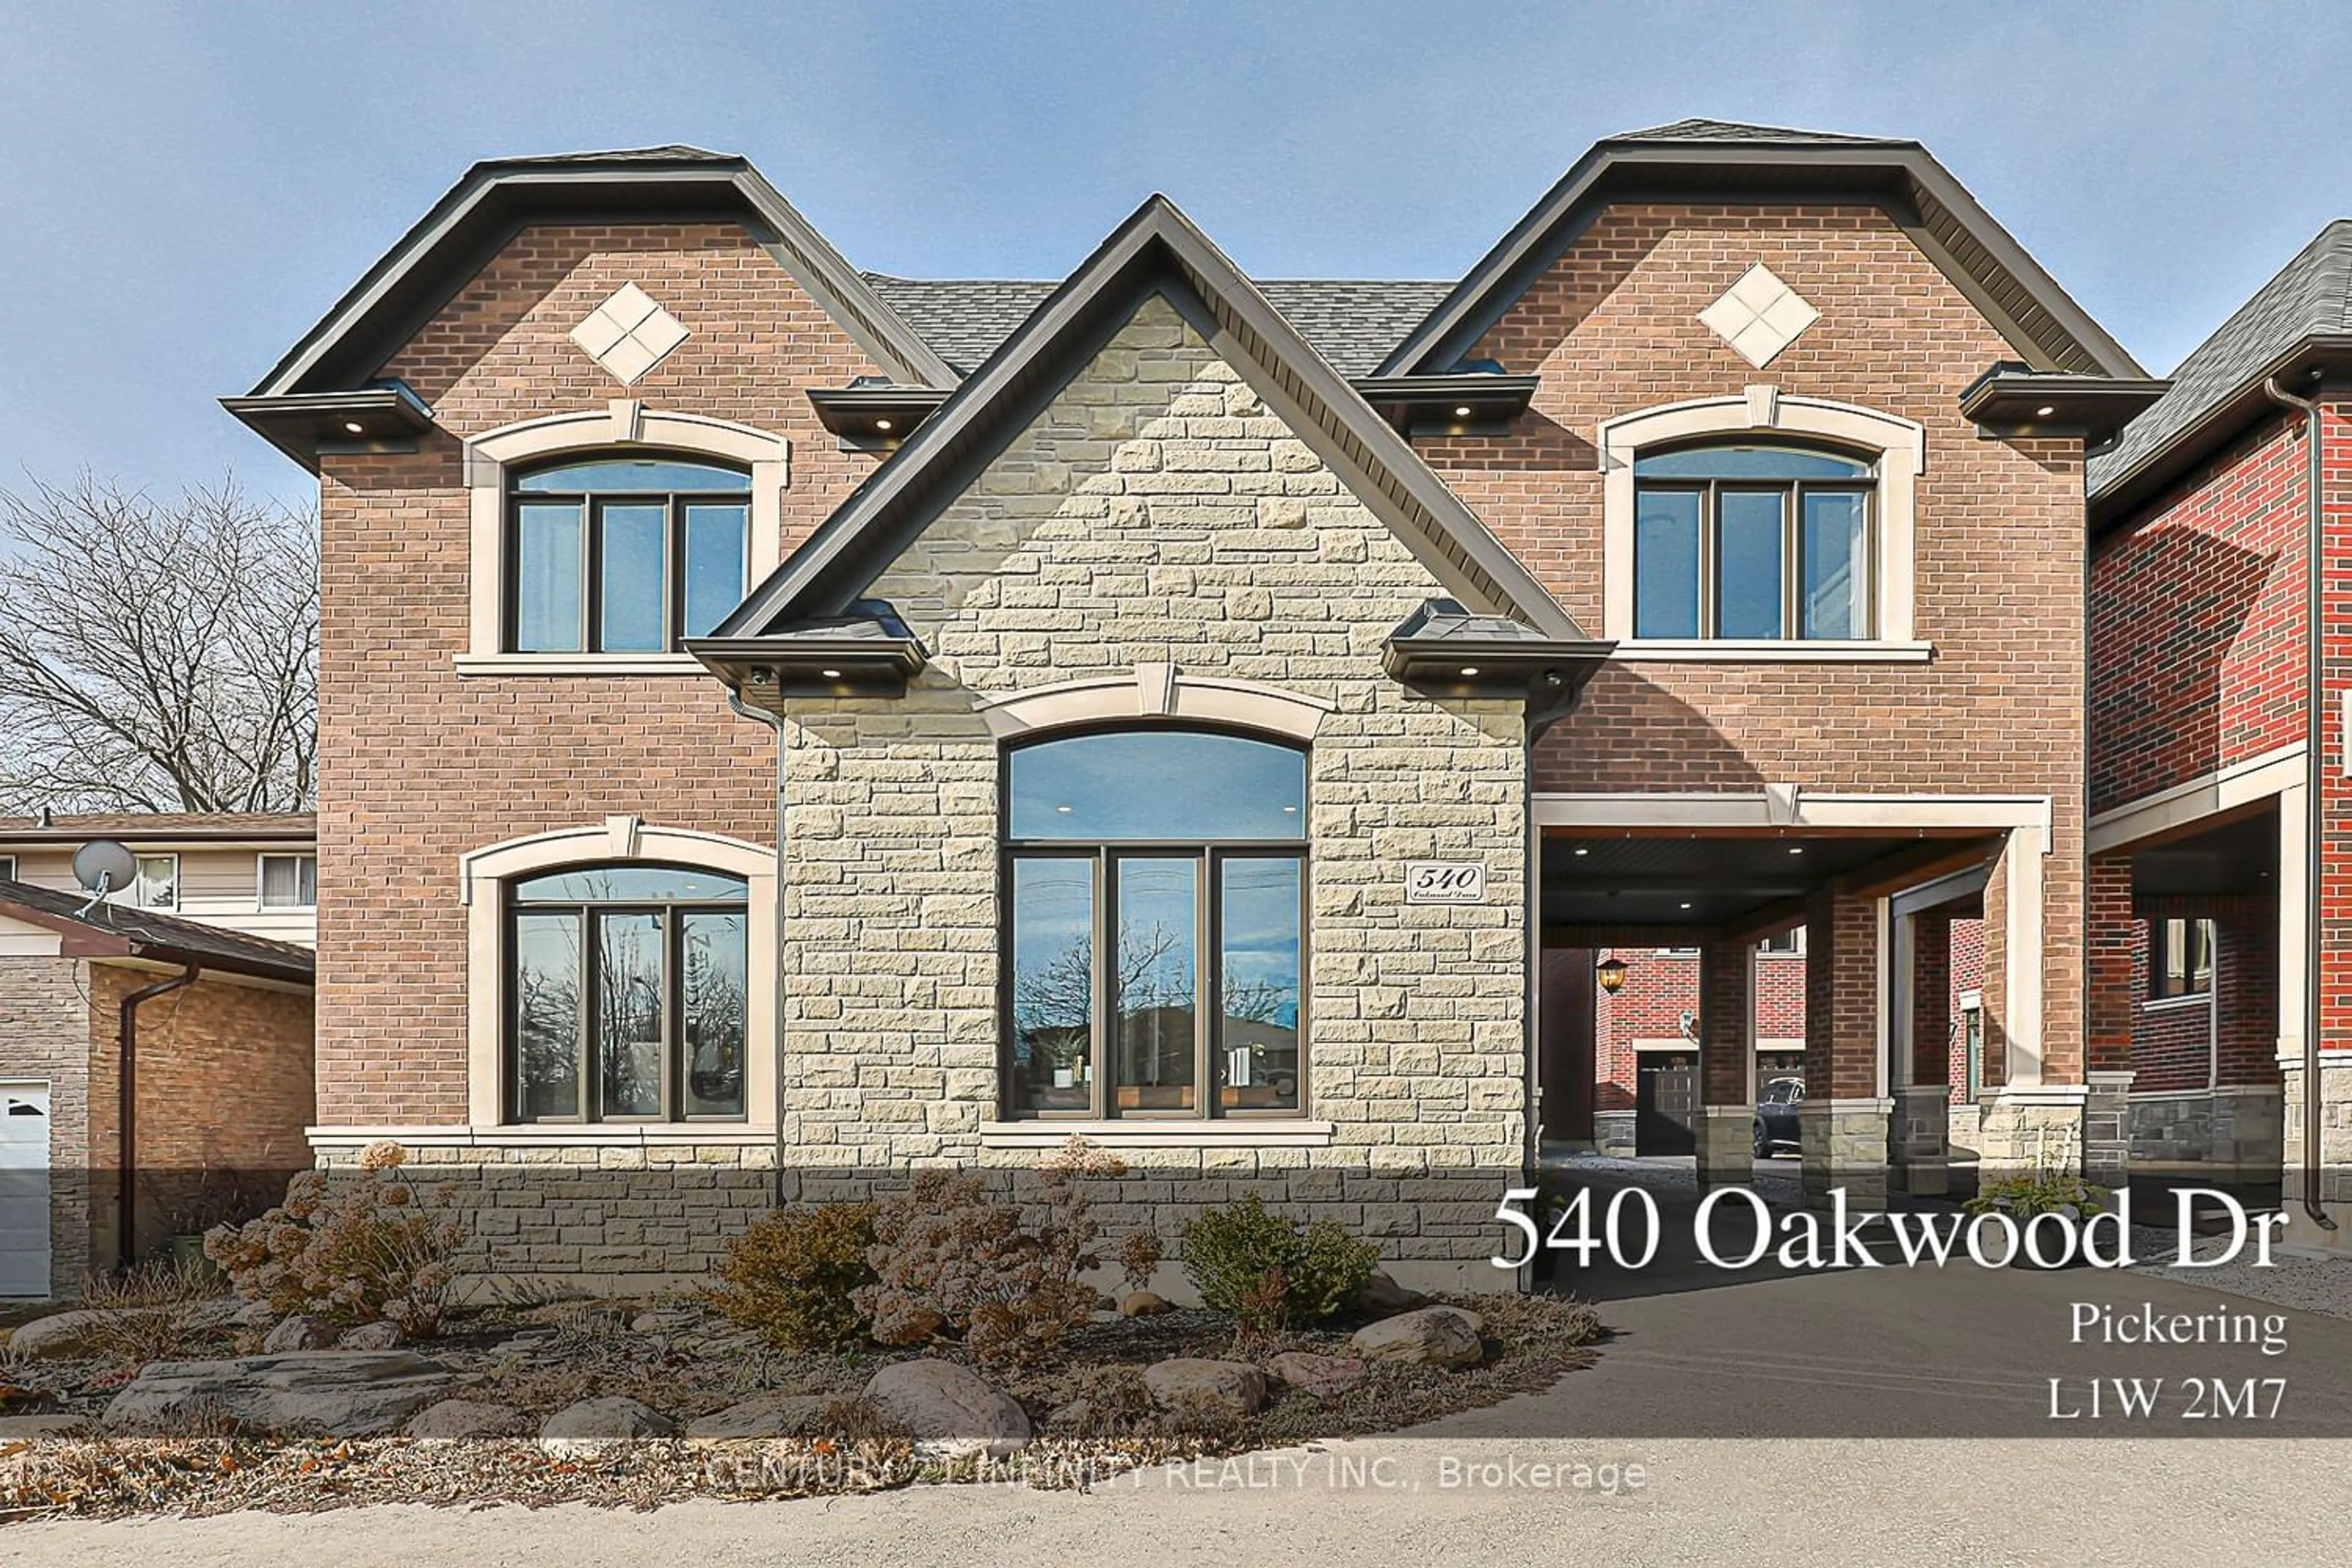 Home with brick exterior material for 540 Oakwood Dr, Pickering Ontario L1W 2M7